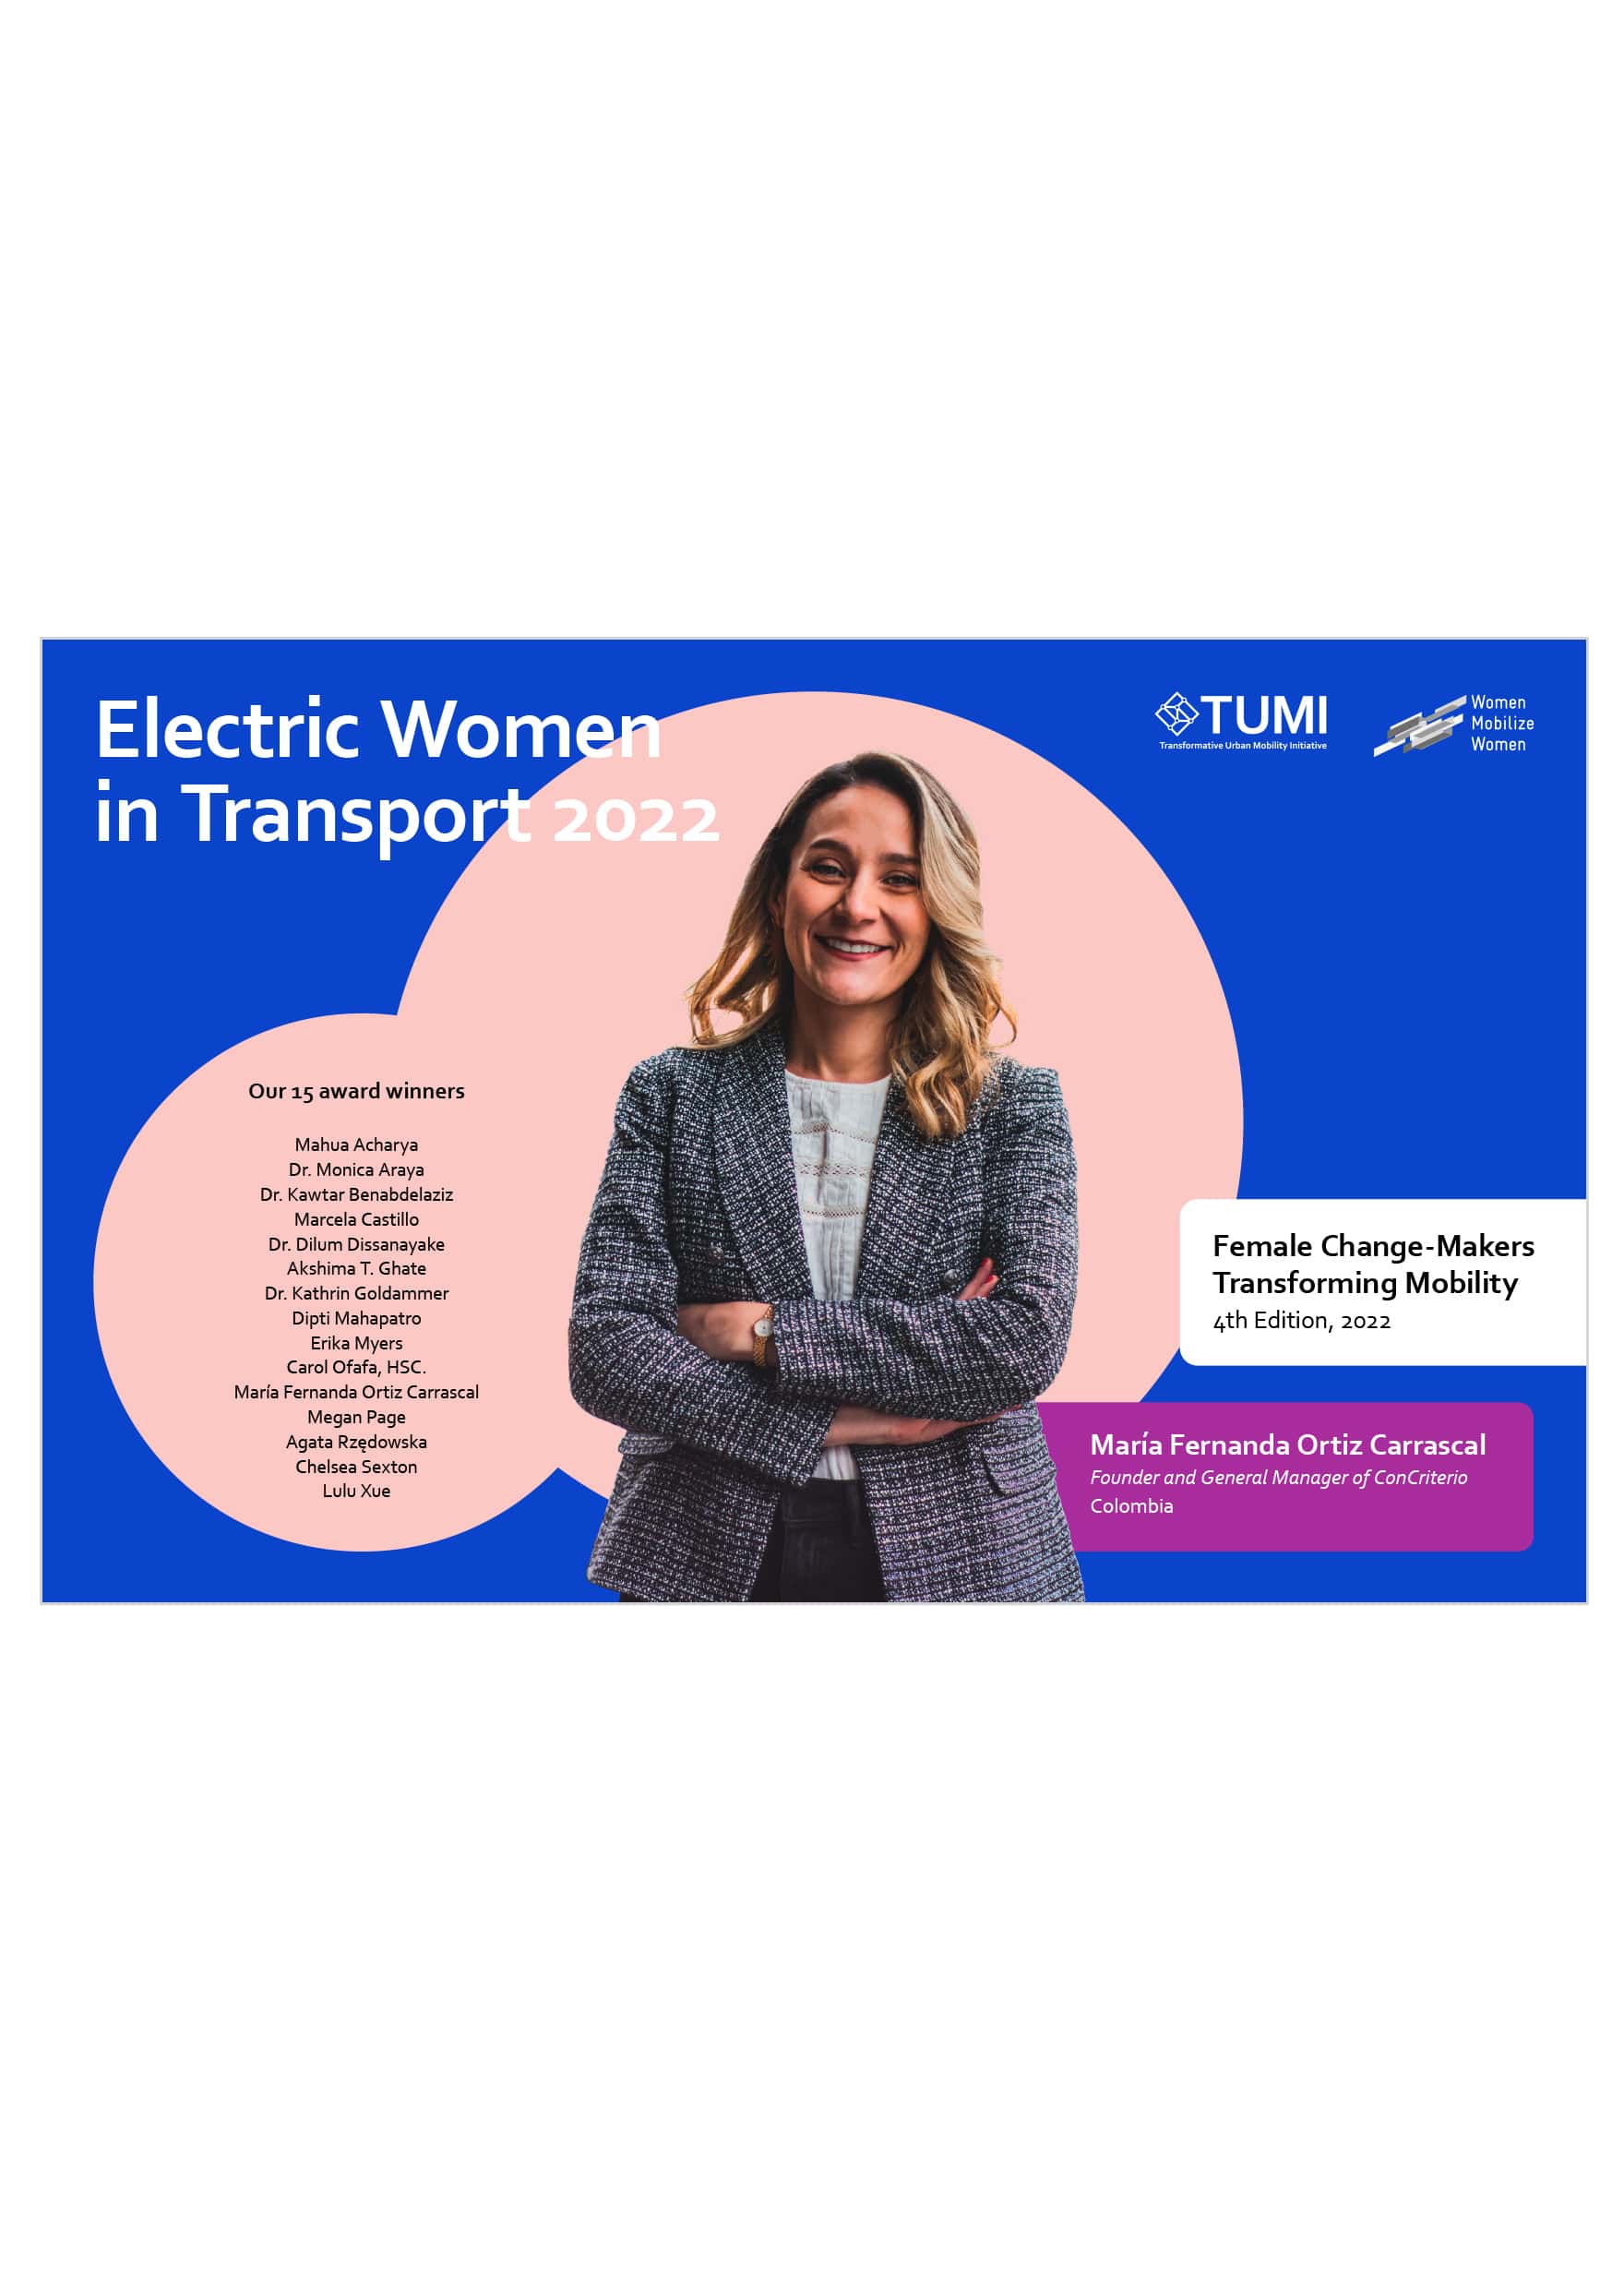 Remarkable Women in Transport 2022 – Female Change-Makers Transforming Mobility, 4th Edition